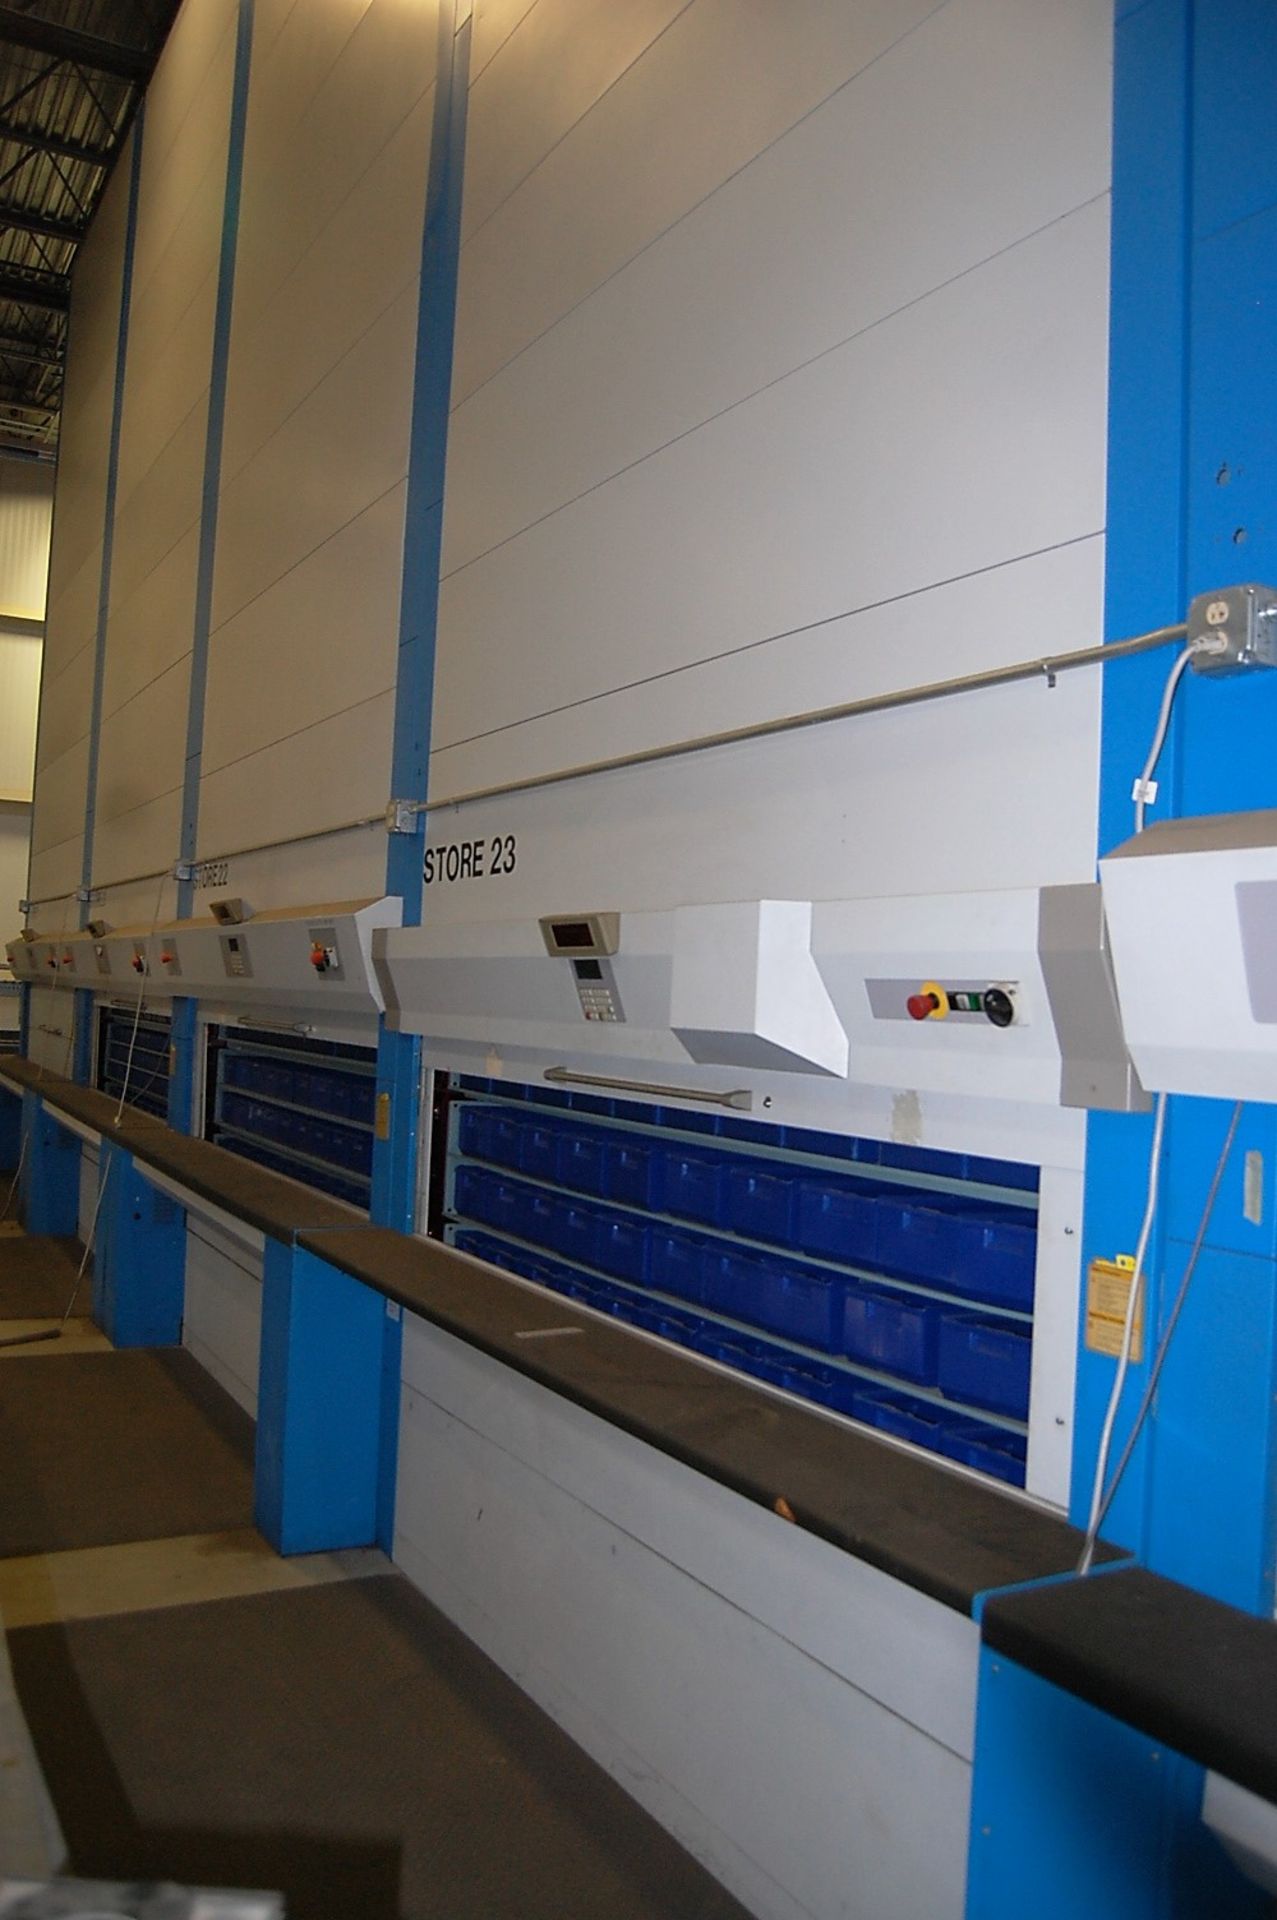 White Conveyors Model Remstar Series 2400 Vertical Carousel Storage/Inventory System - Image 4 of 49